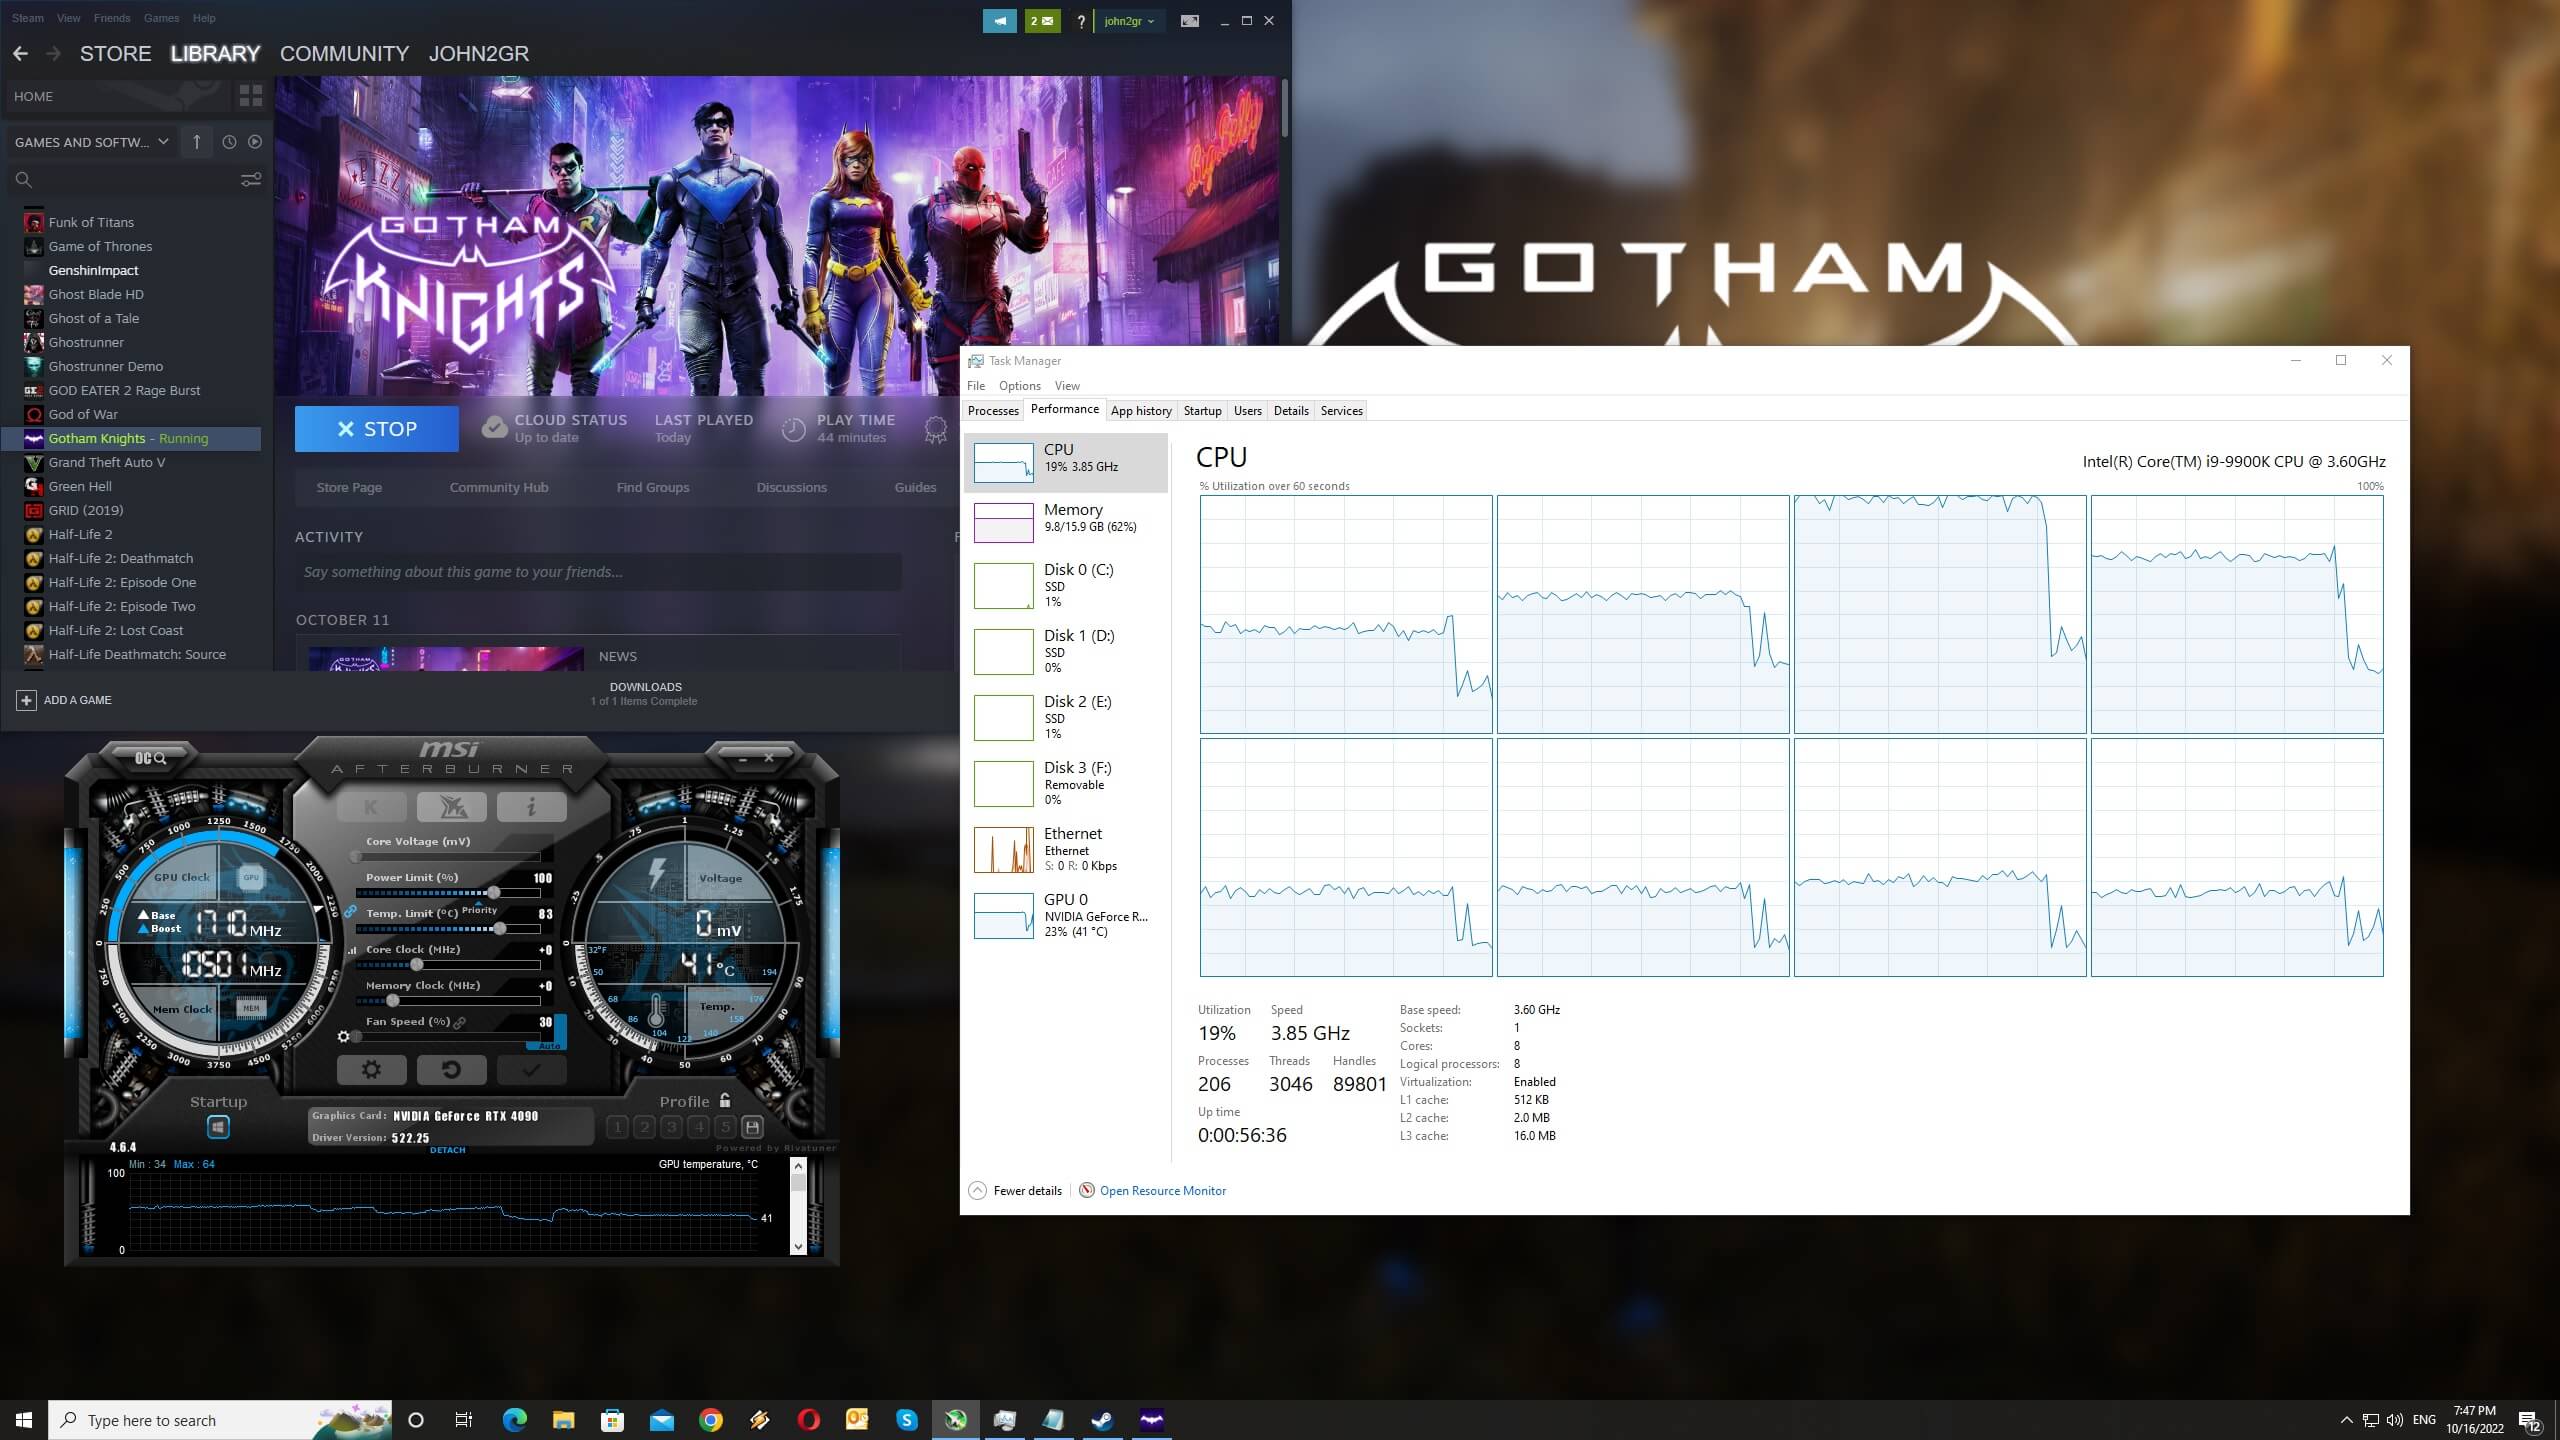 Gotham Knights Performance Has Much Improved from Launch